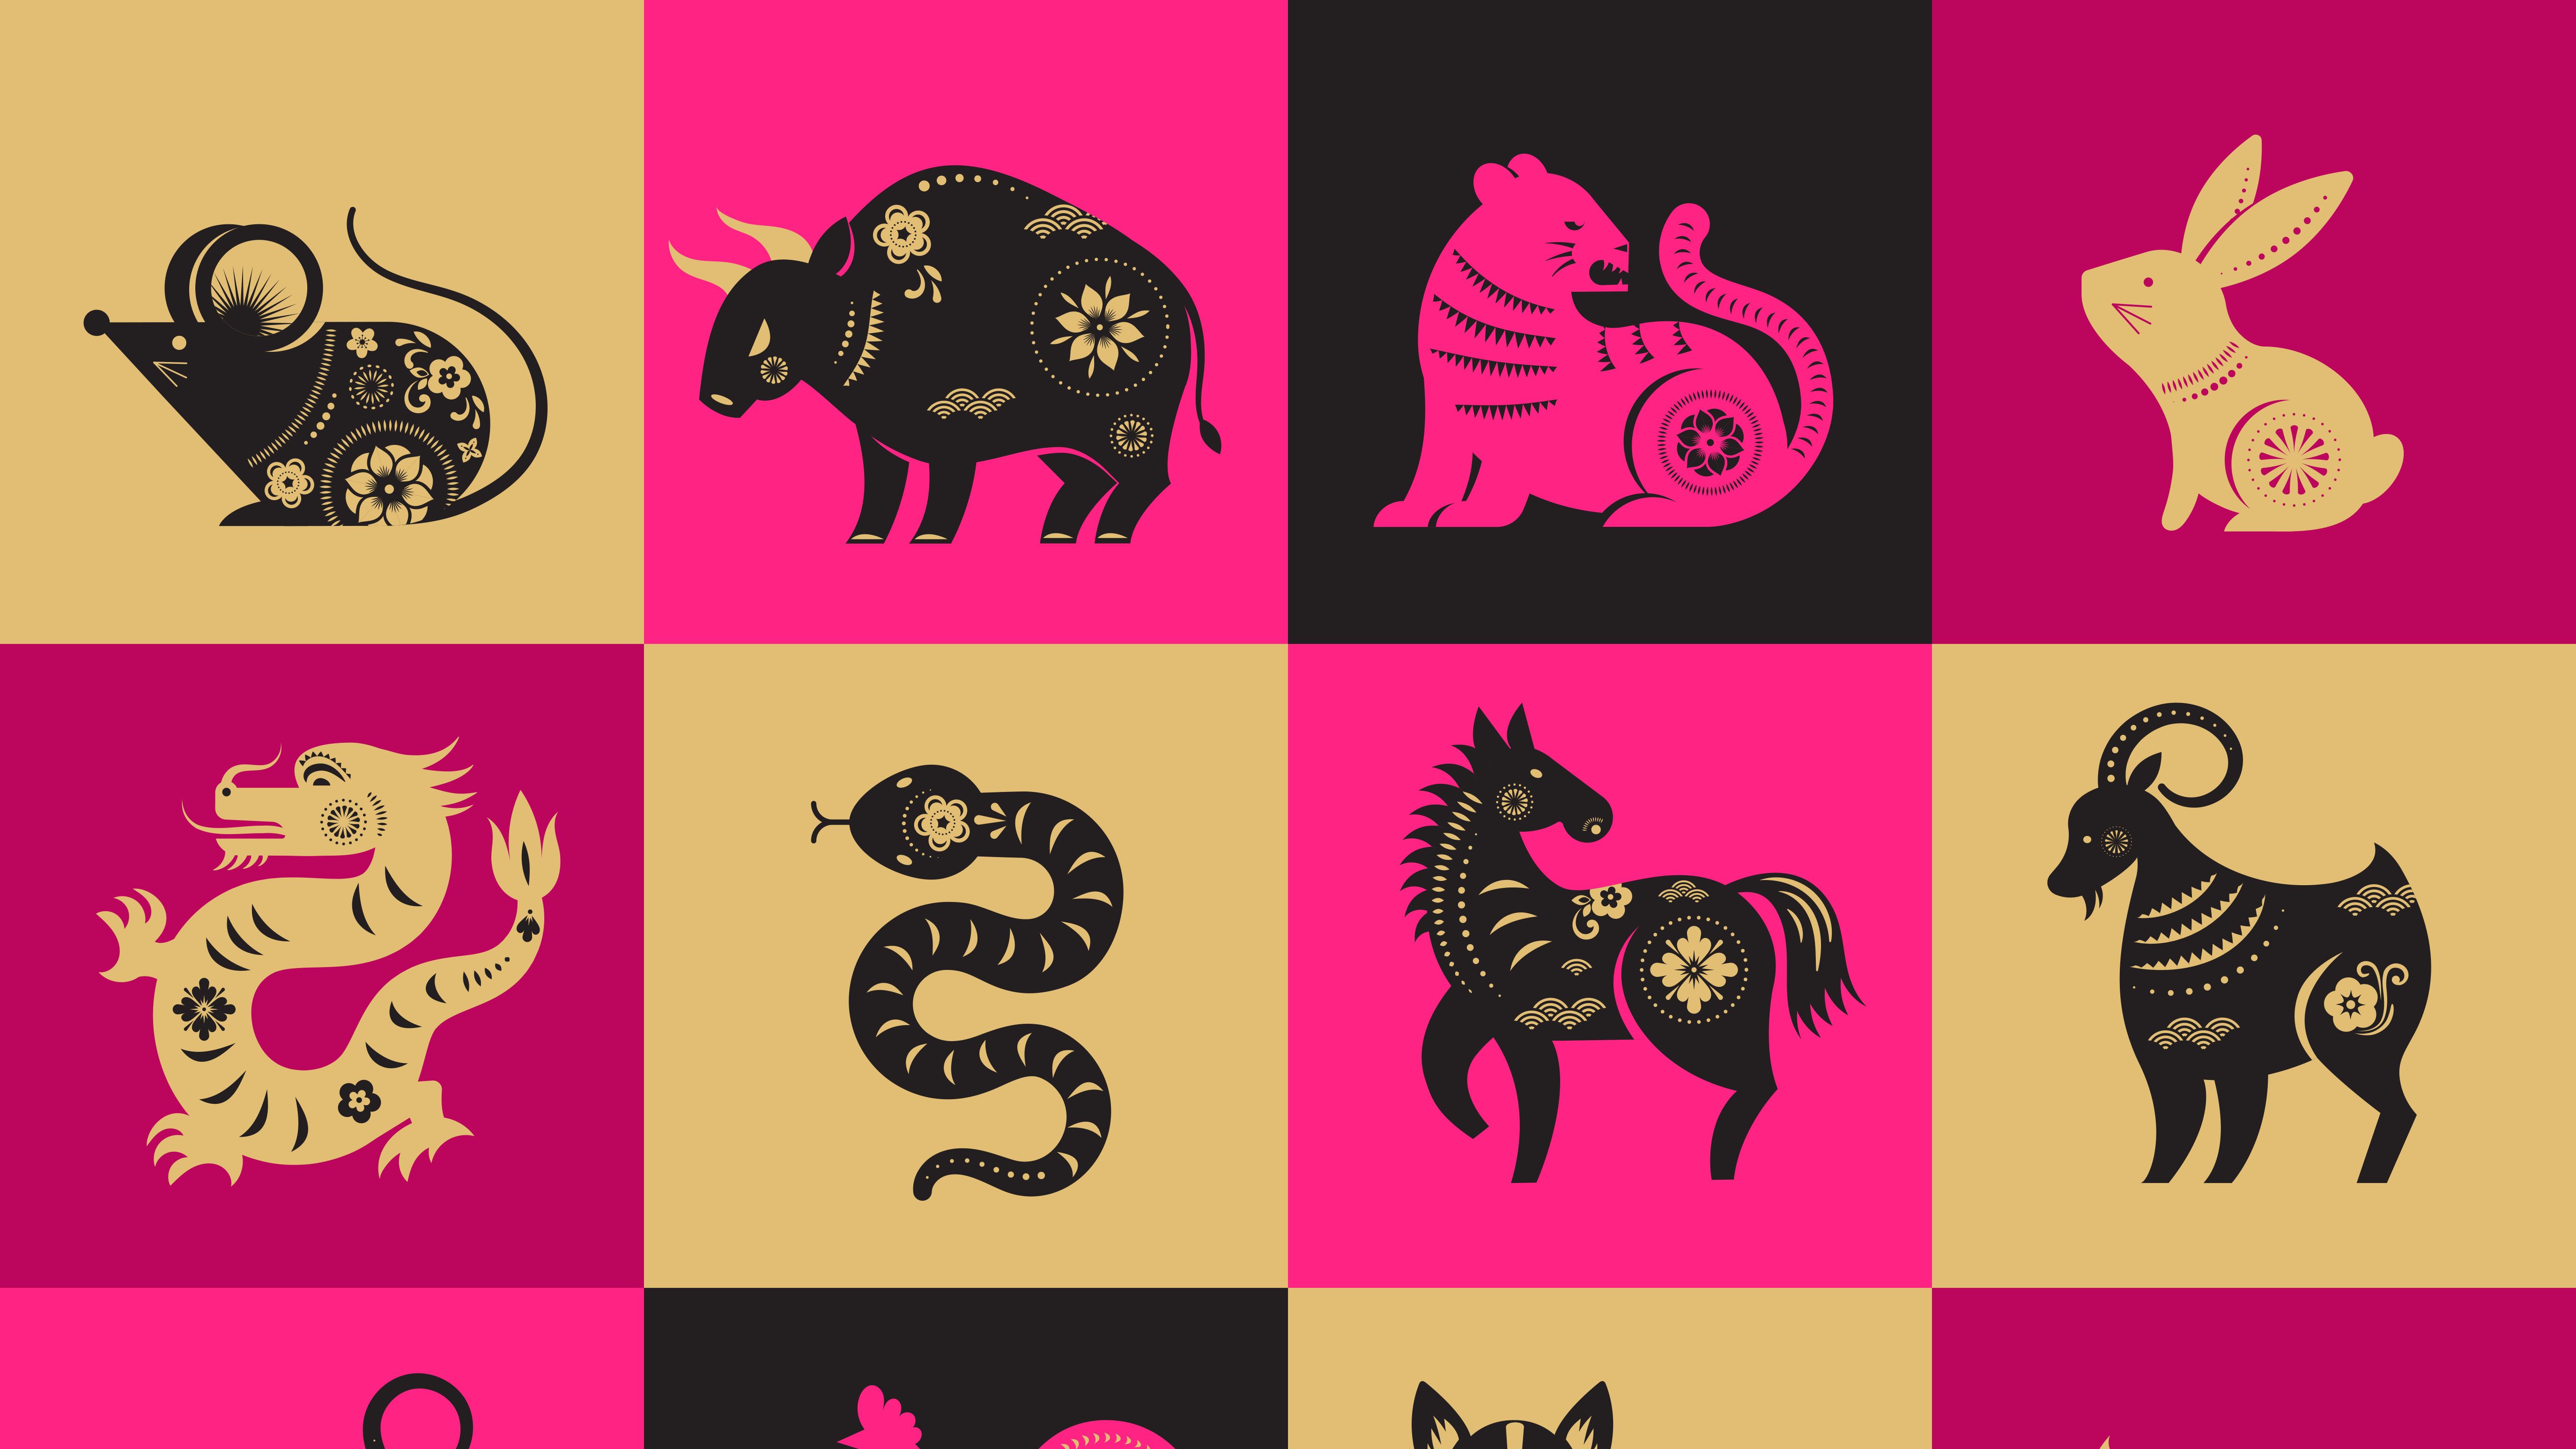 The 12 Chinese Zodiac Signs and Five Elements, and What They Mean